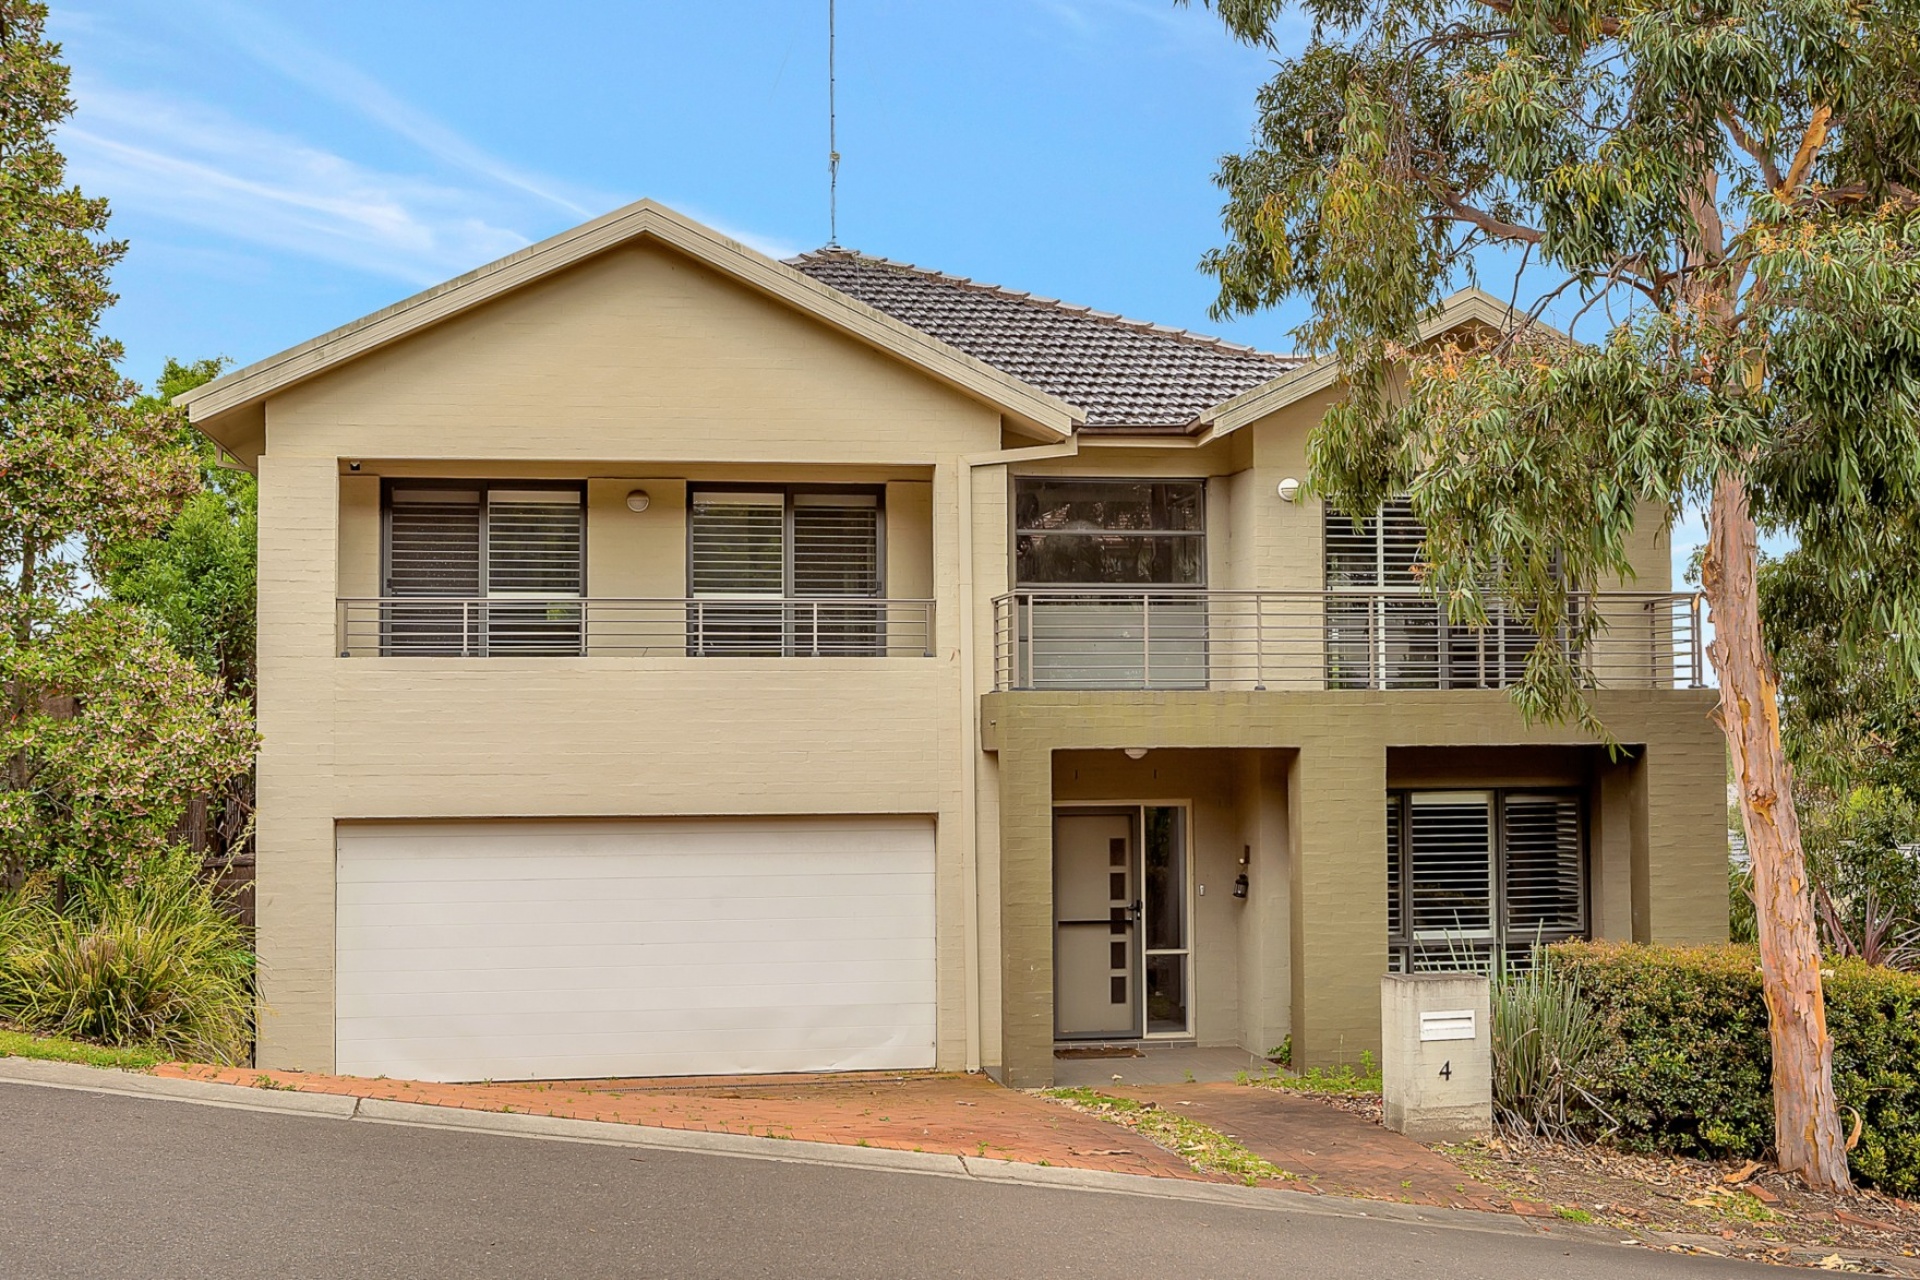 4 Rooms, House, Leased, Sherbrooke Crescent, 2 Bathrooms, Listing ID 1473, Castle Hill , NSW, Australia, 2154,